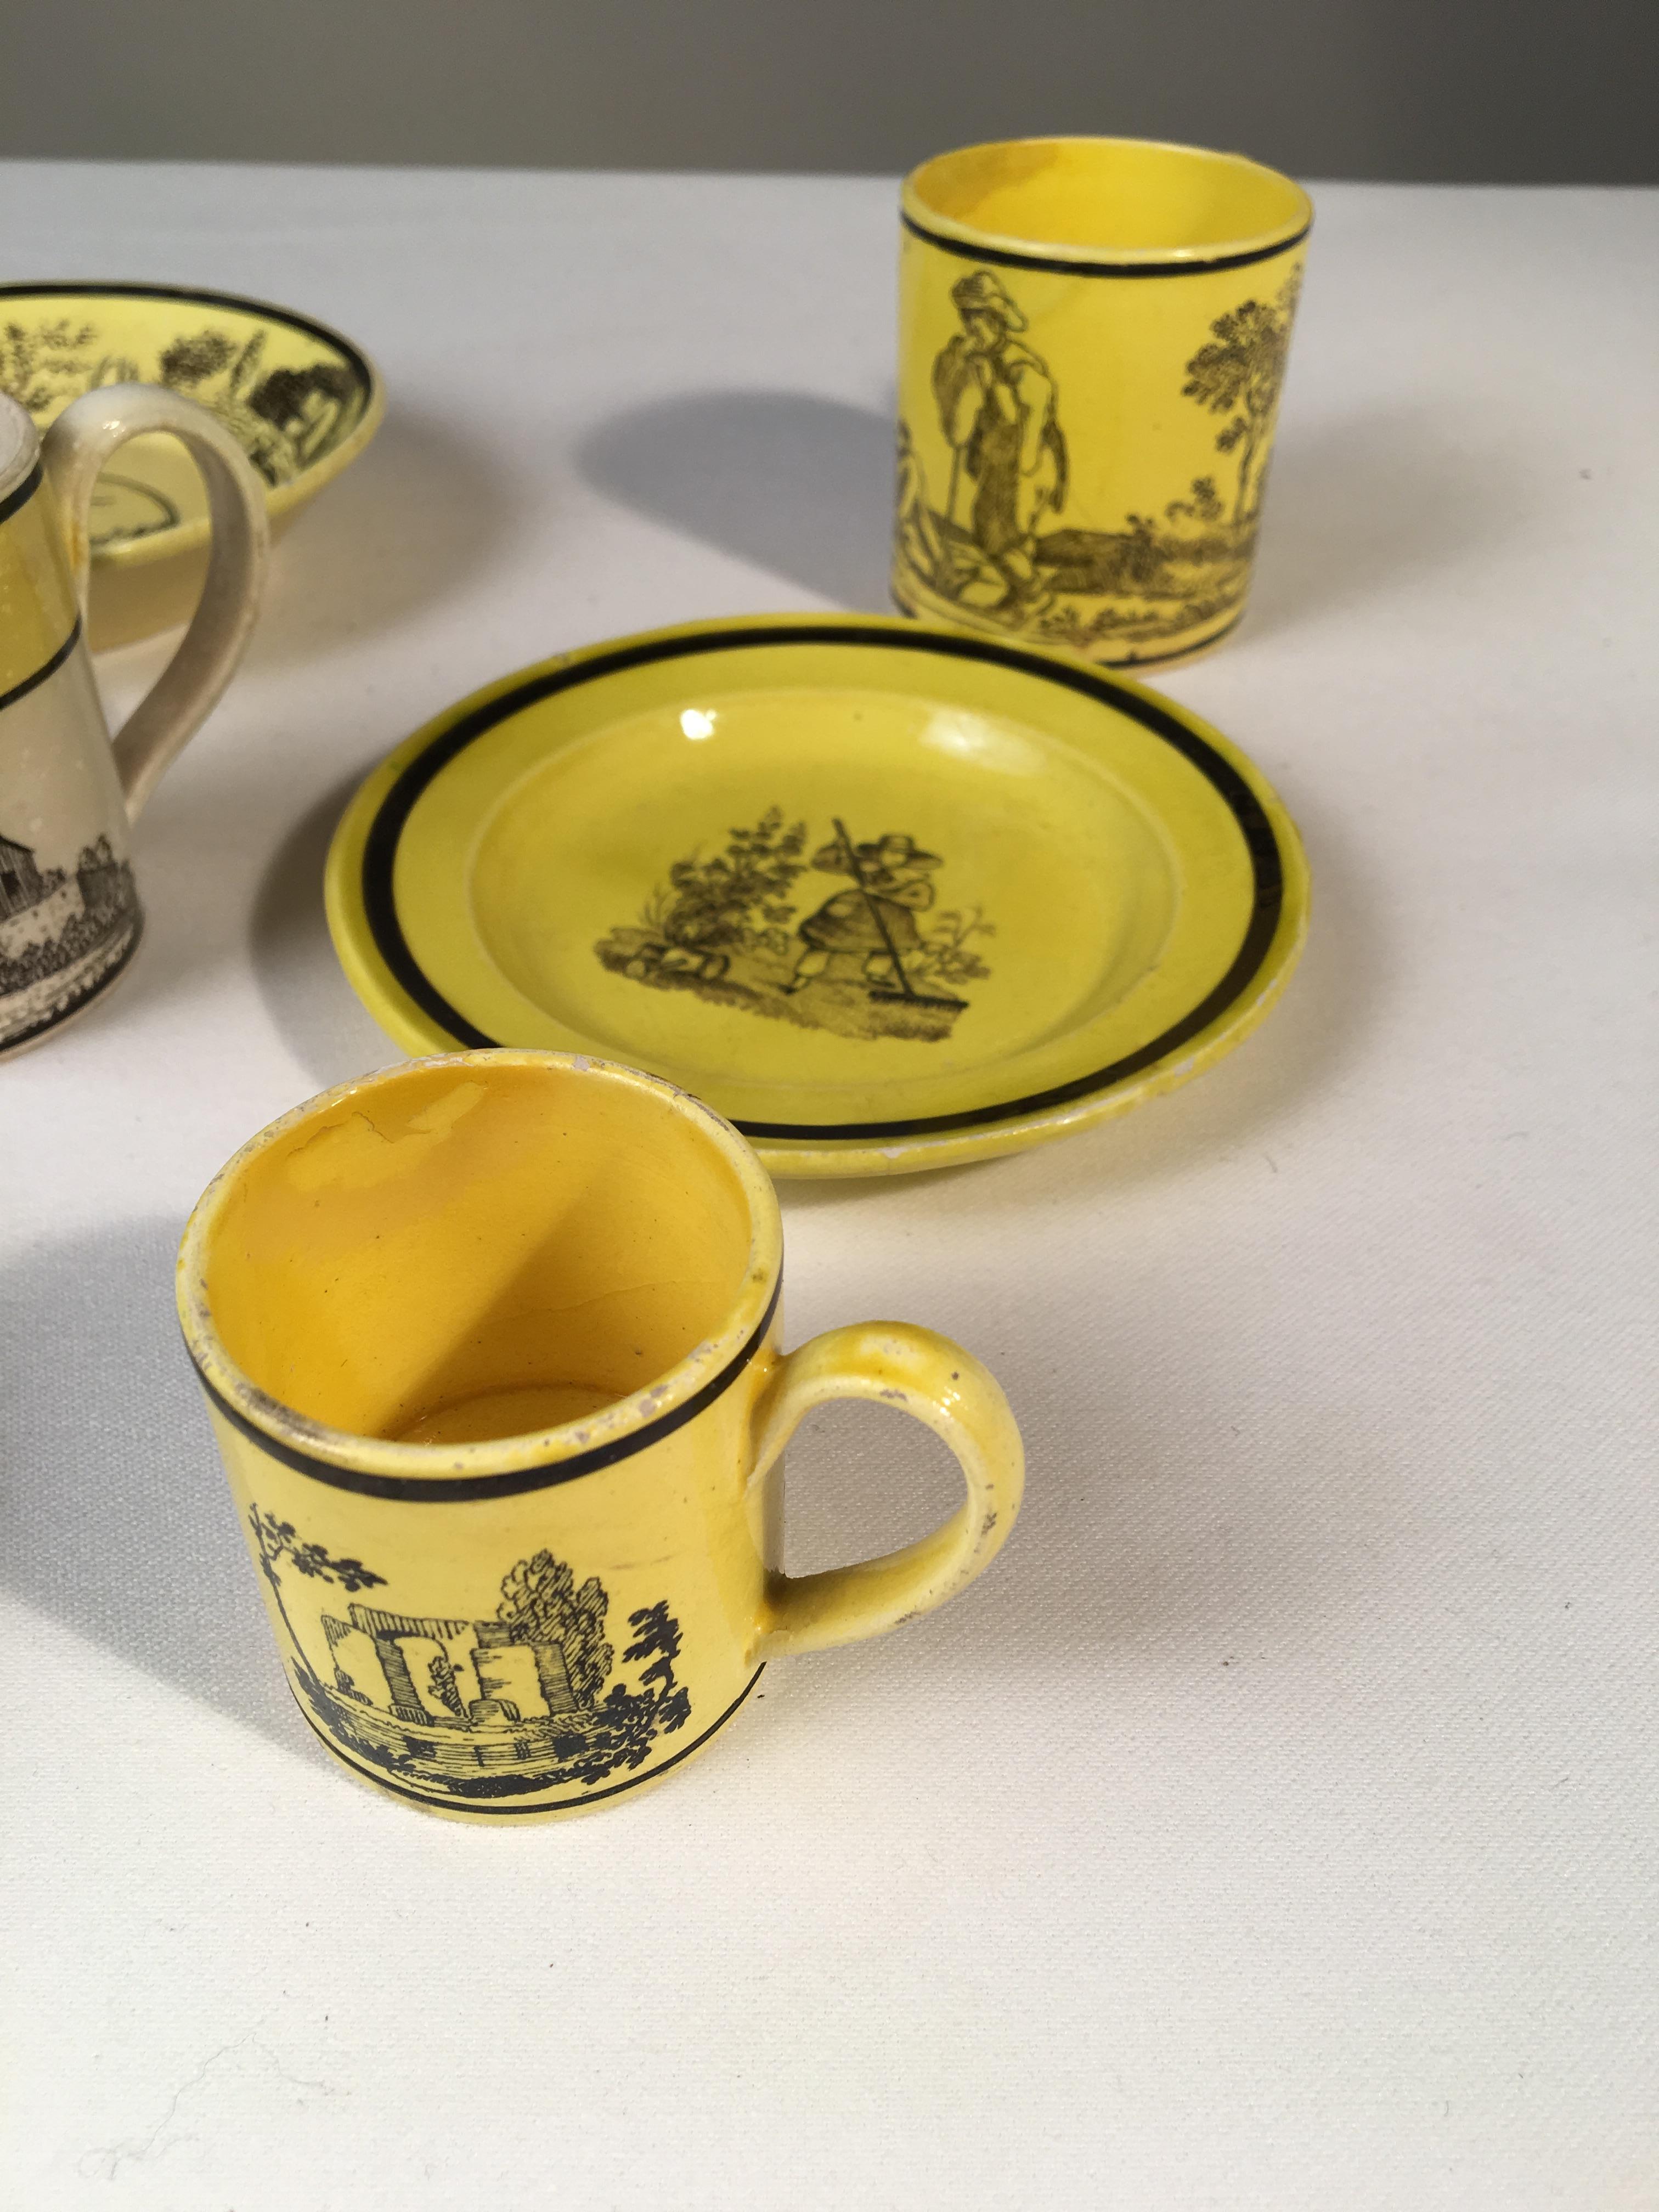 Empire Creil Demitasse Cups and Saucers, 19th Century